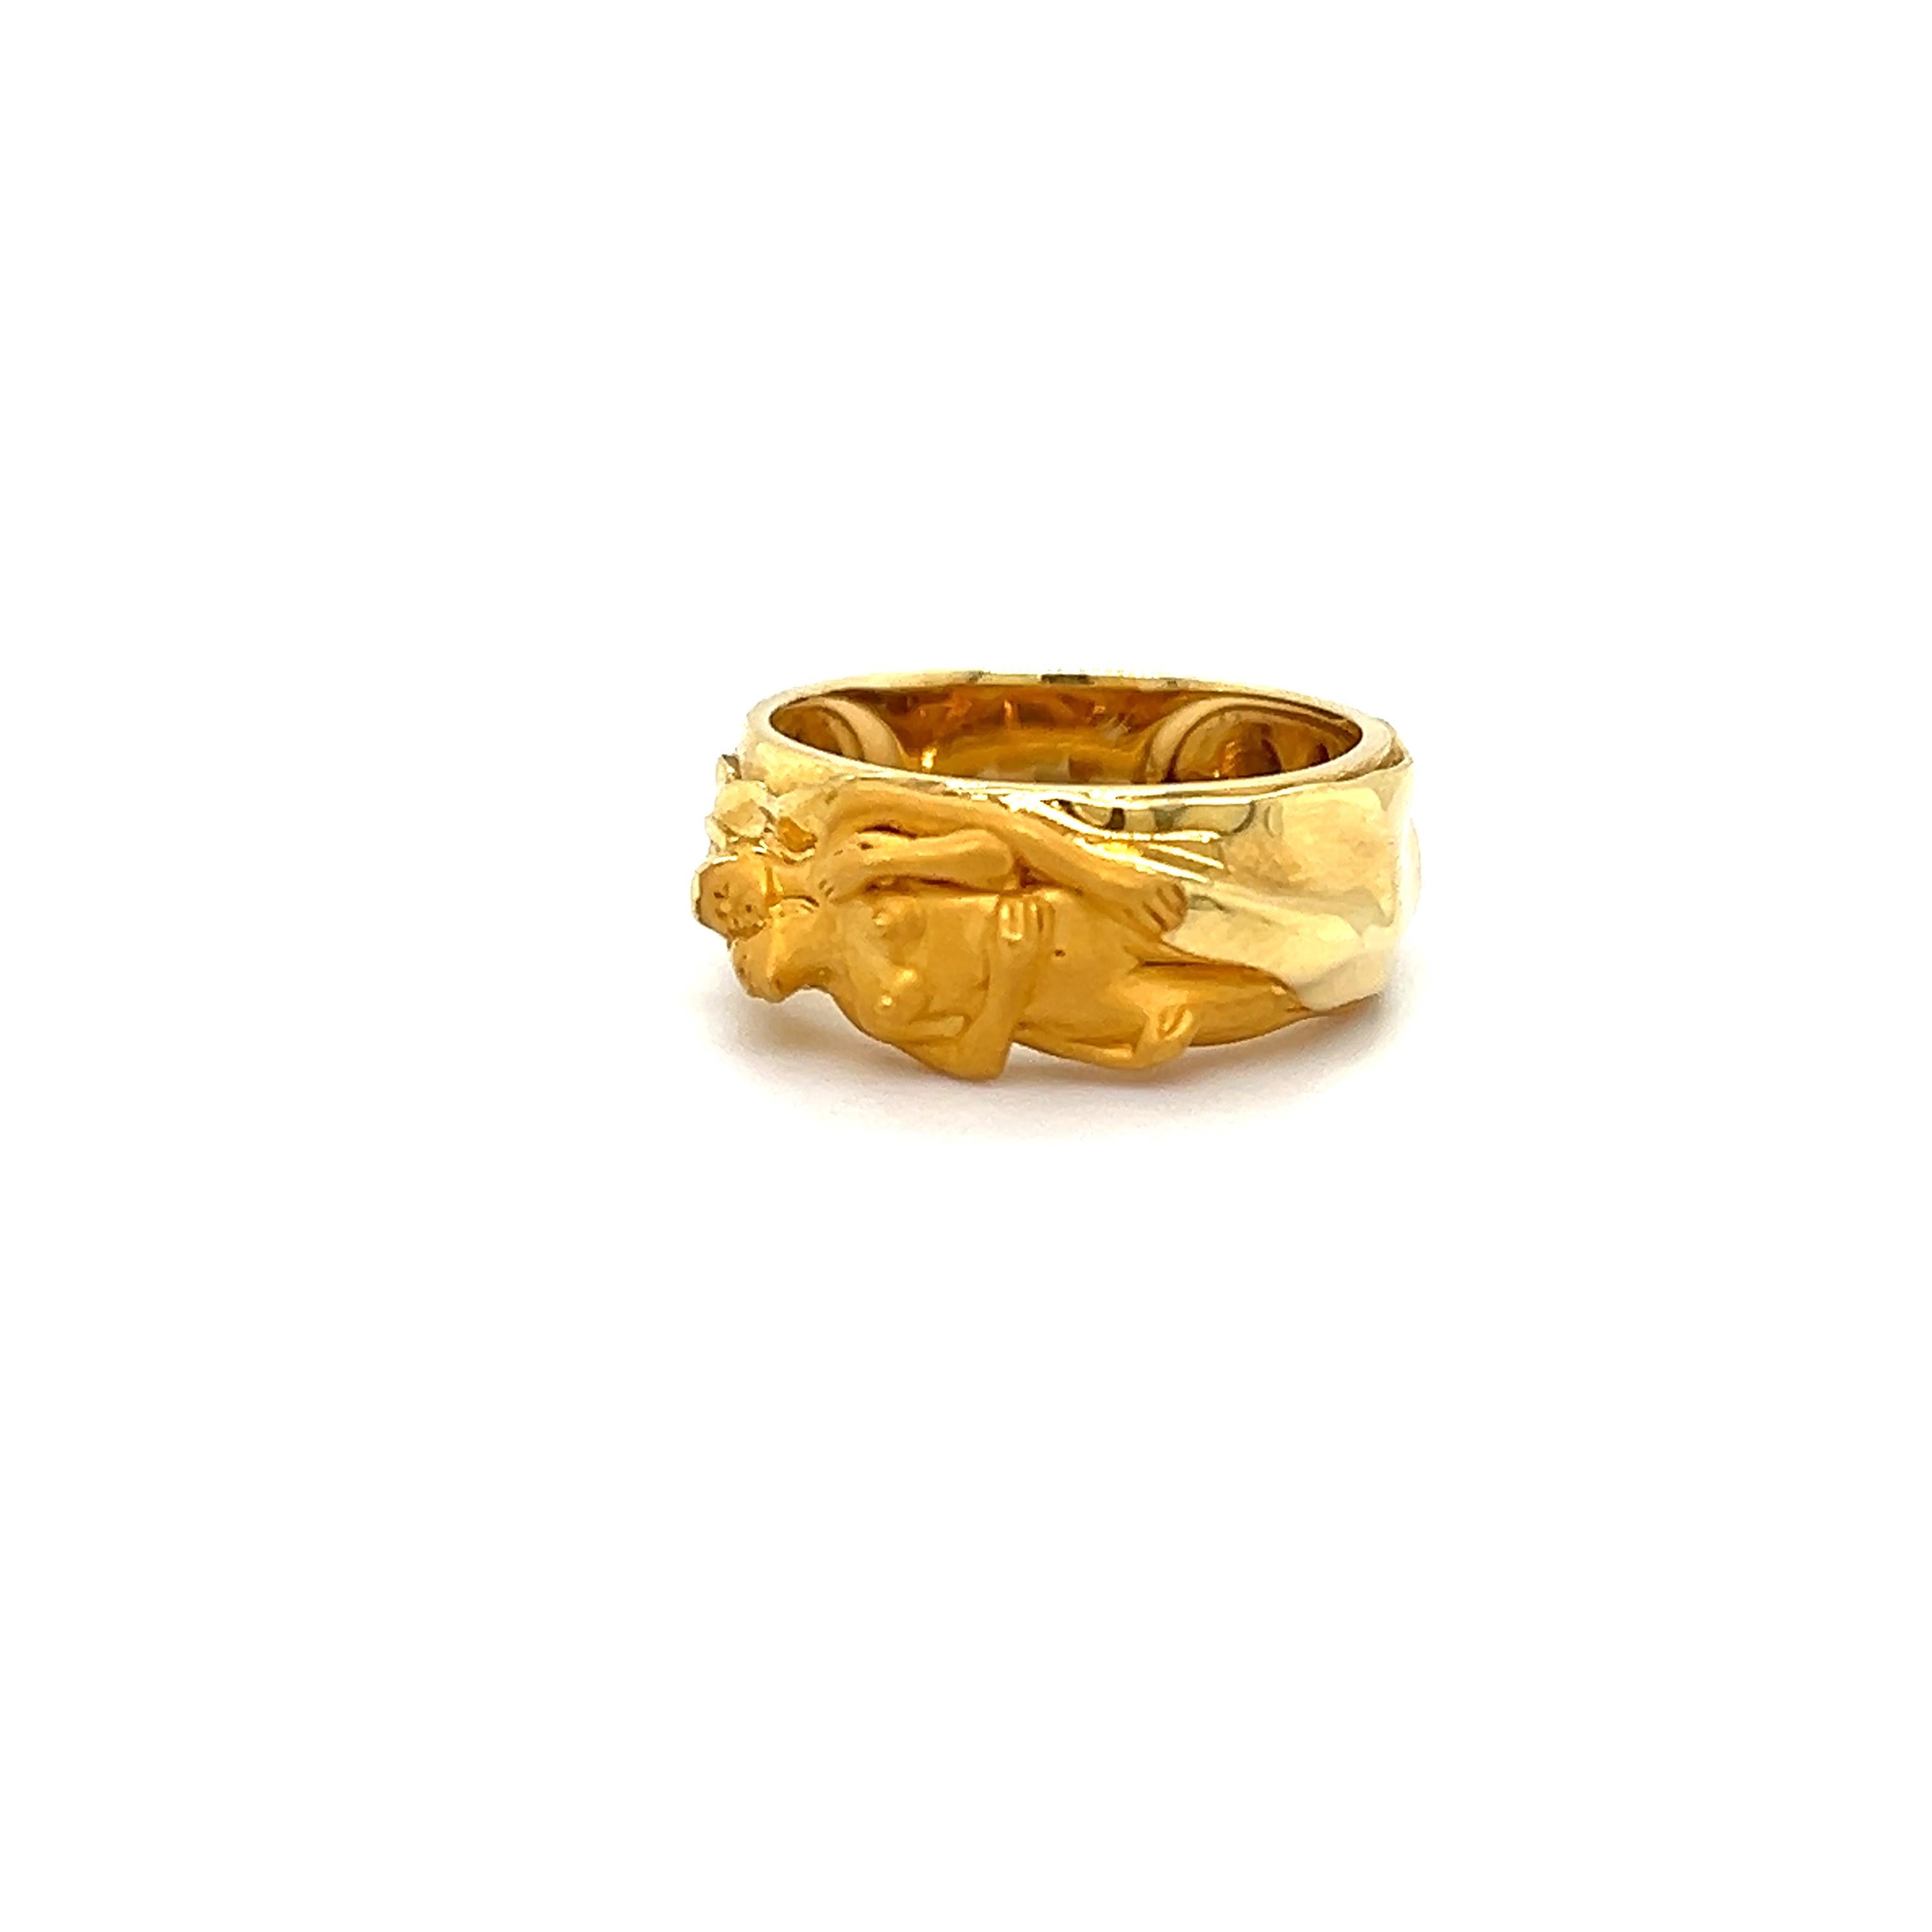 From famed designer Carrera Y Carrera is this amazing erotic 18k yellow gold ring. The ring is a rare design as it is part of the 